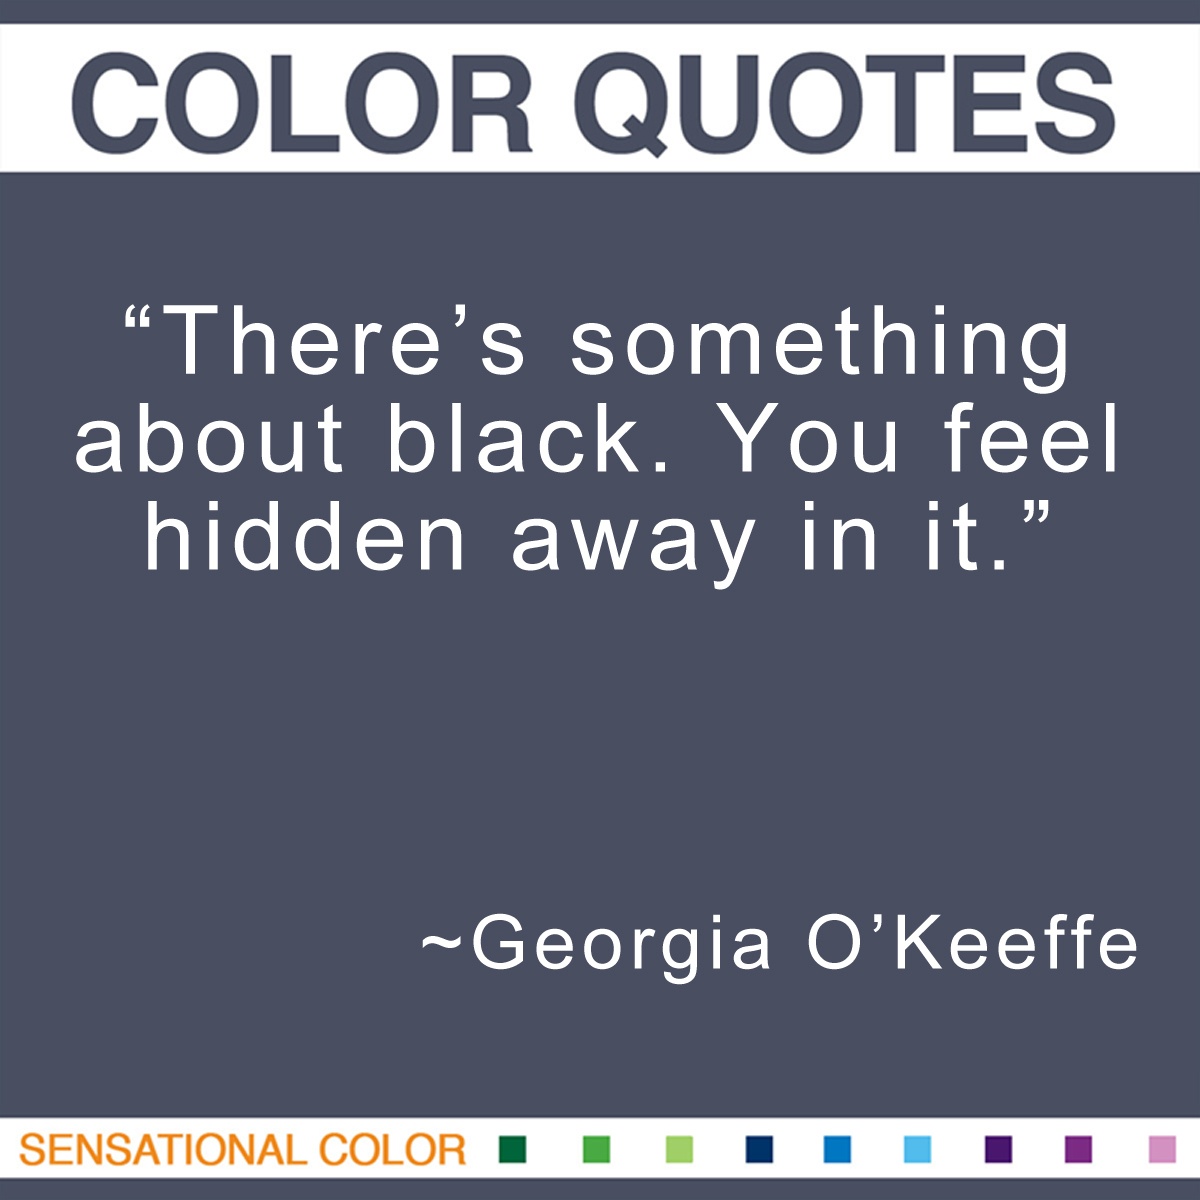 “There’s something about black. You feel hidden away in it.” - Georgia O’Keeffe